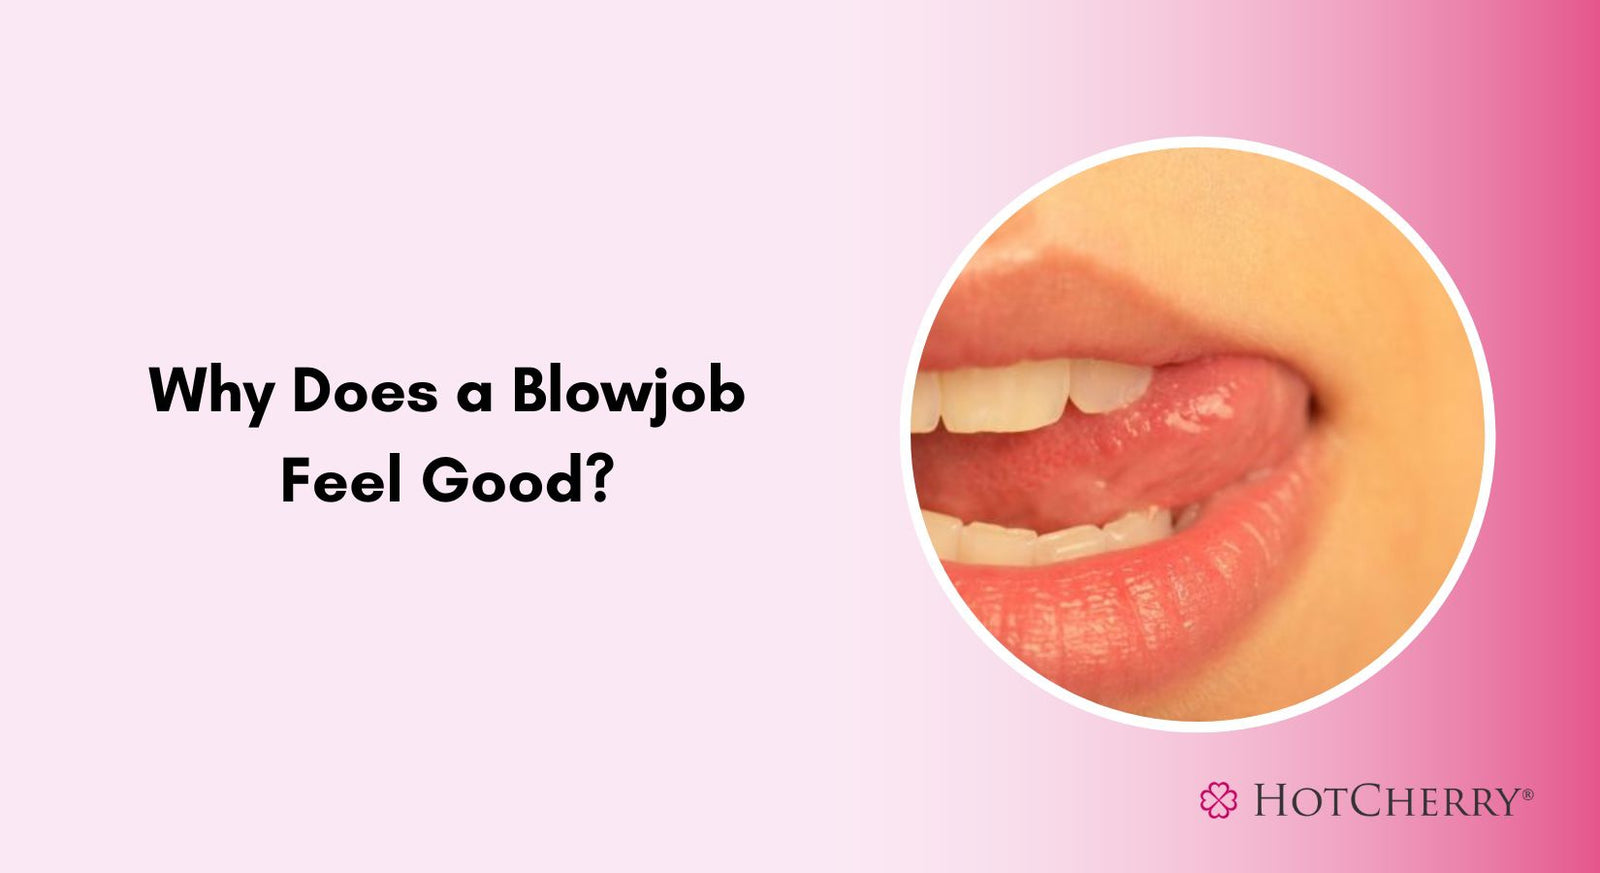 Why Does a Blowjob Feel Good?